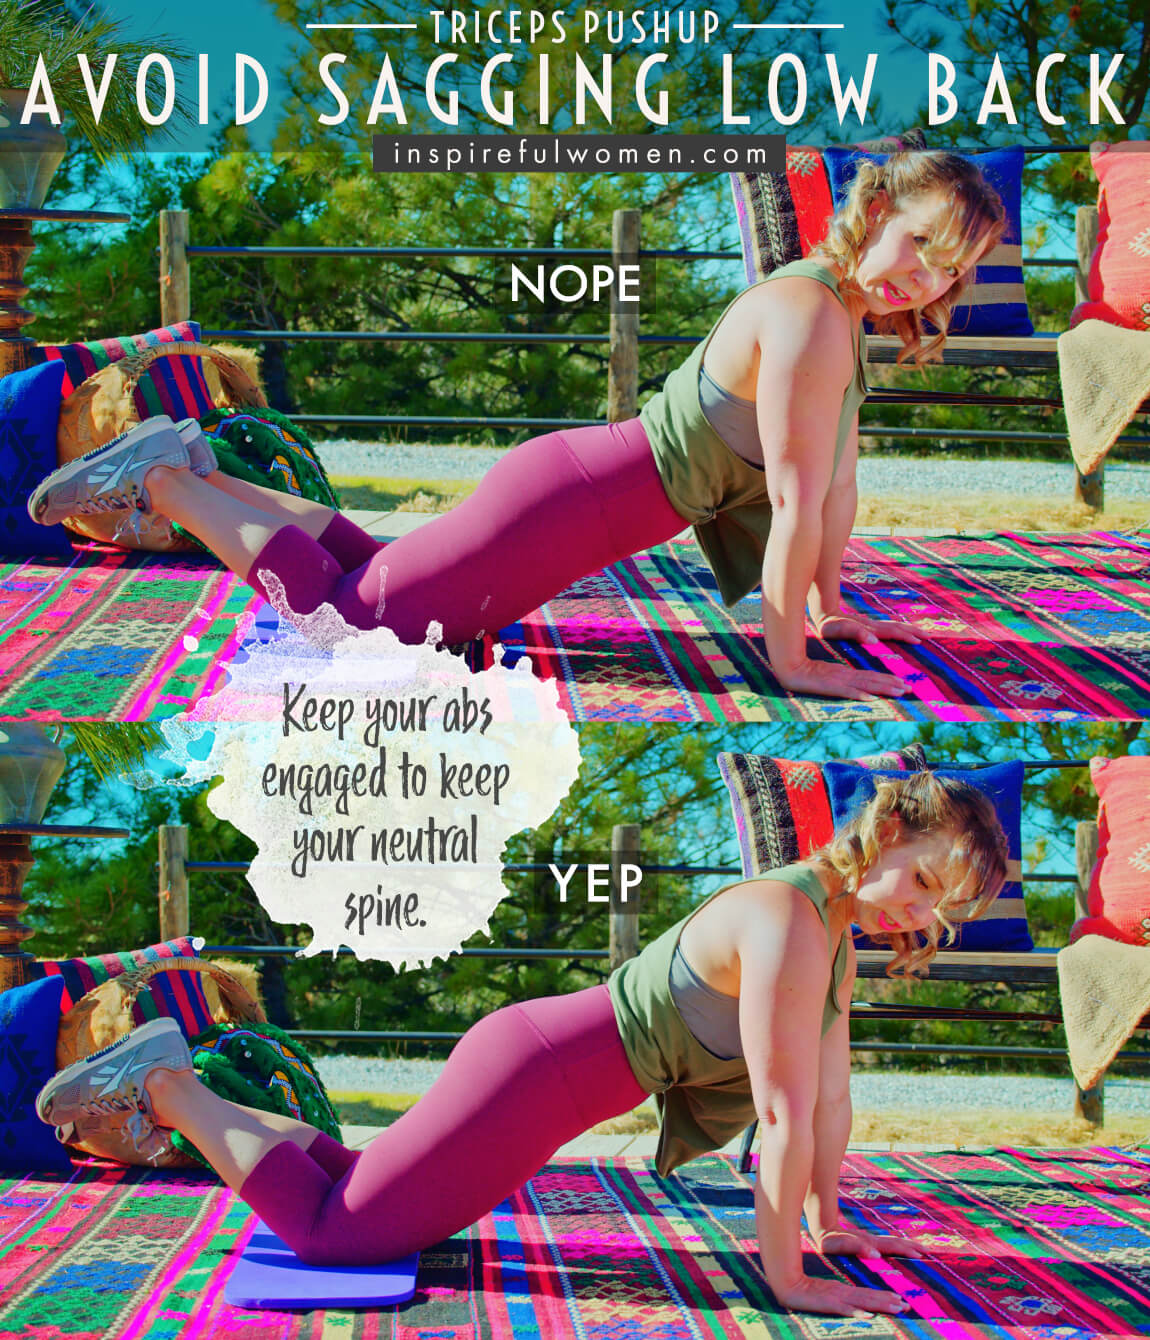 avoid-sagging-low-back-triceps-push-ups-arm-exercise-common-mistakes